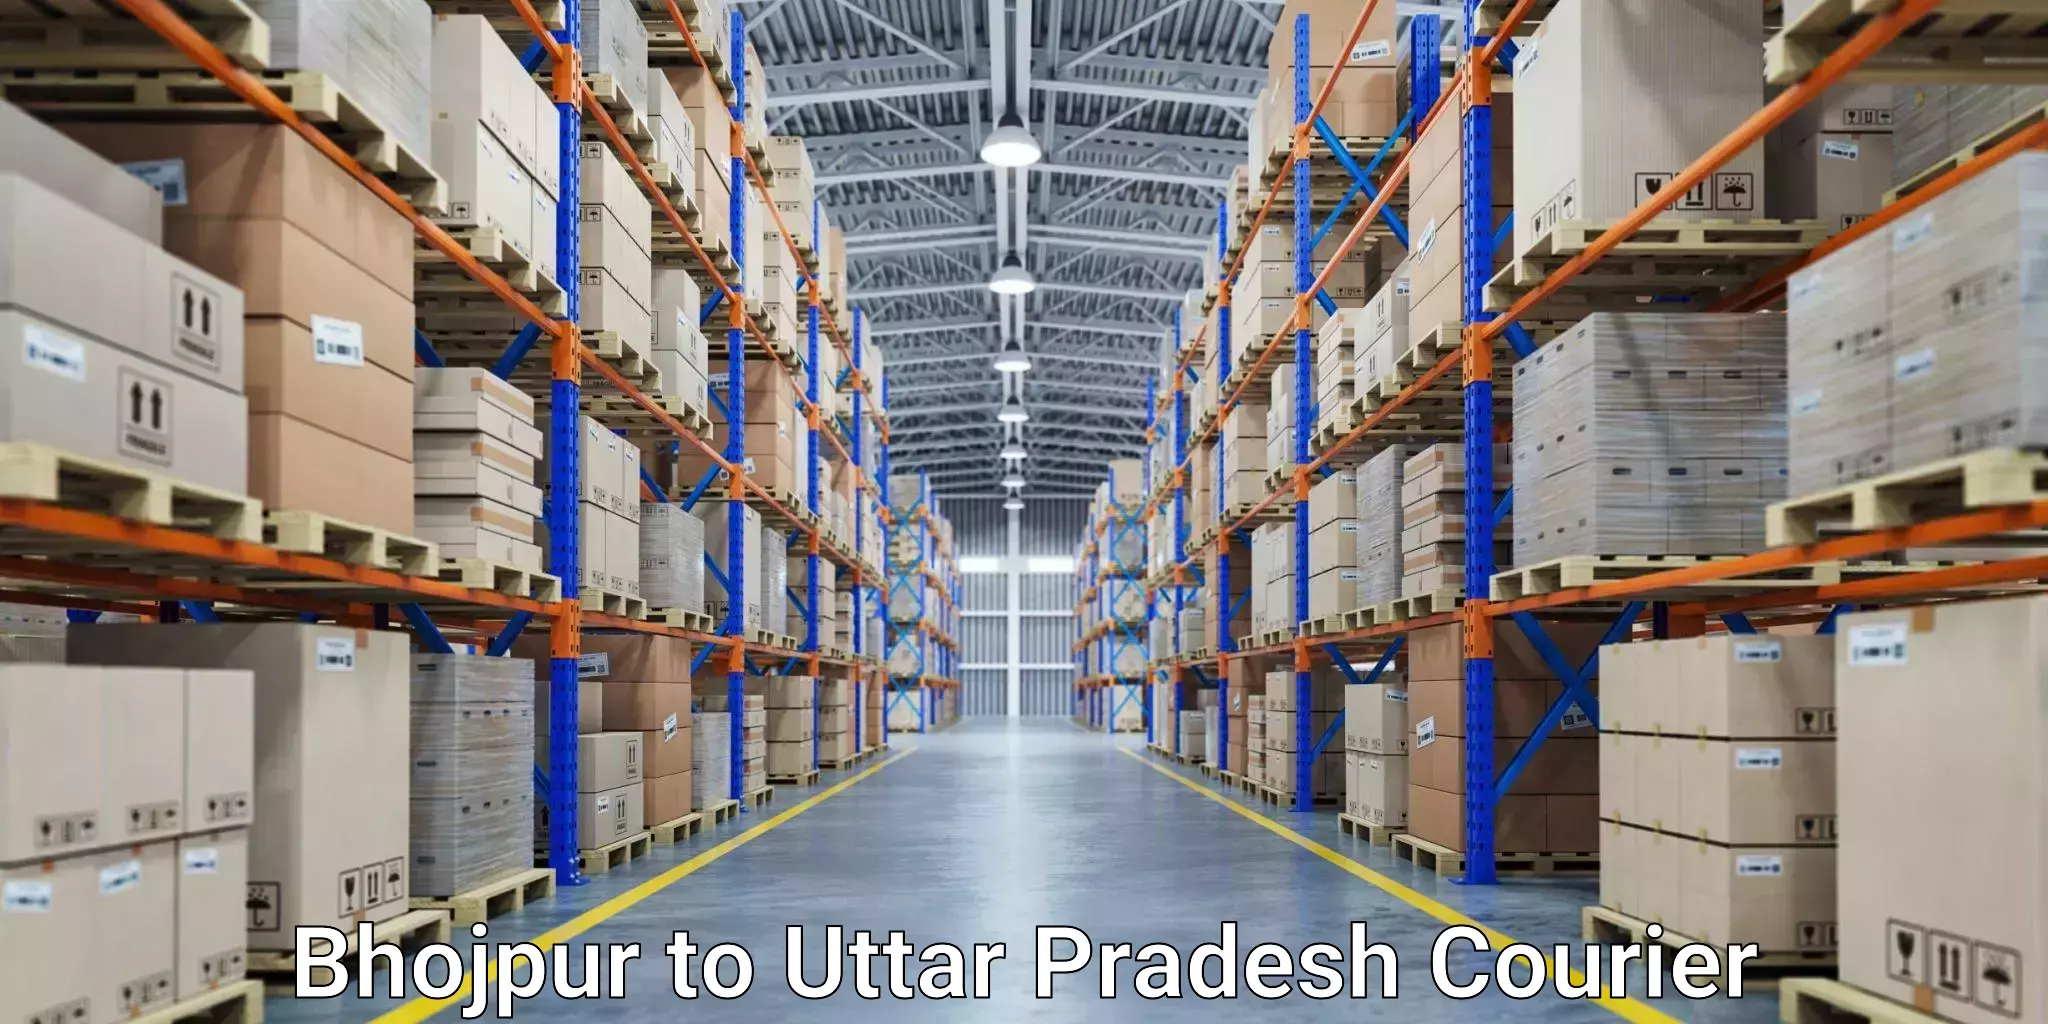 Reliable courier service Bhojpur to Barabanki